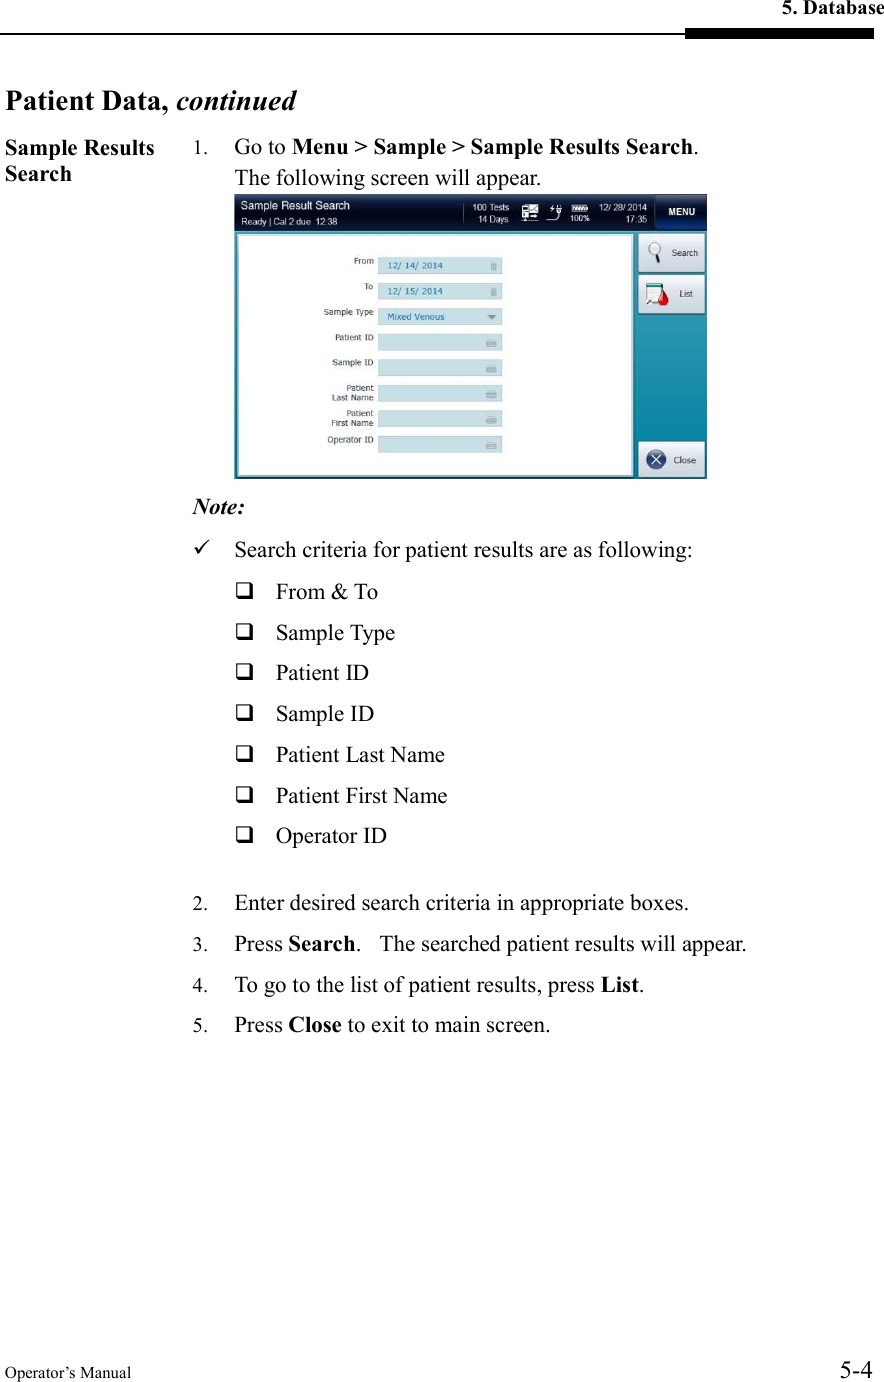 5. Database Operator’s Manual  5-4  Patient Data, continuedSample Results Search 1. Go to Menu &gt; Sample &gt; Sample Results Search.     The following screen will appear.  Note:  Search criteria for patient results are as following:  From &amp; To  Sample Type  Patient ID  Sample ID  Patient Last Name  Patient First Name  Operator ID  2. Enter desired search criteria in appropriate boxes. 3. Press Search.    The searched patient results will appear. 4. To go to the list of patient results, press List. 5. Press Close to exit to main screen.   